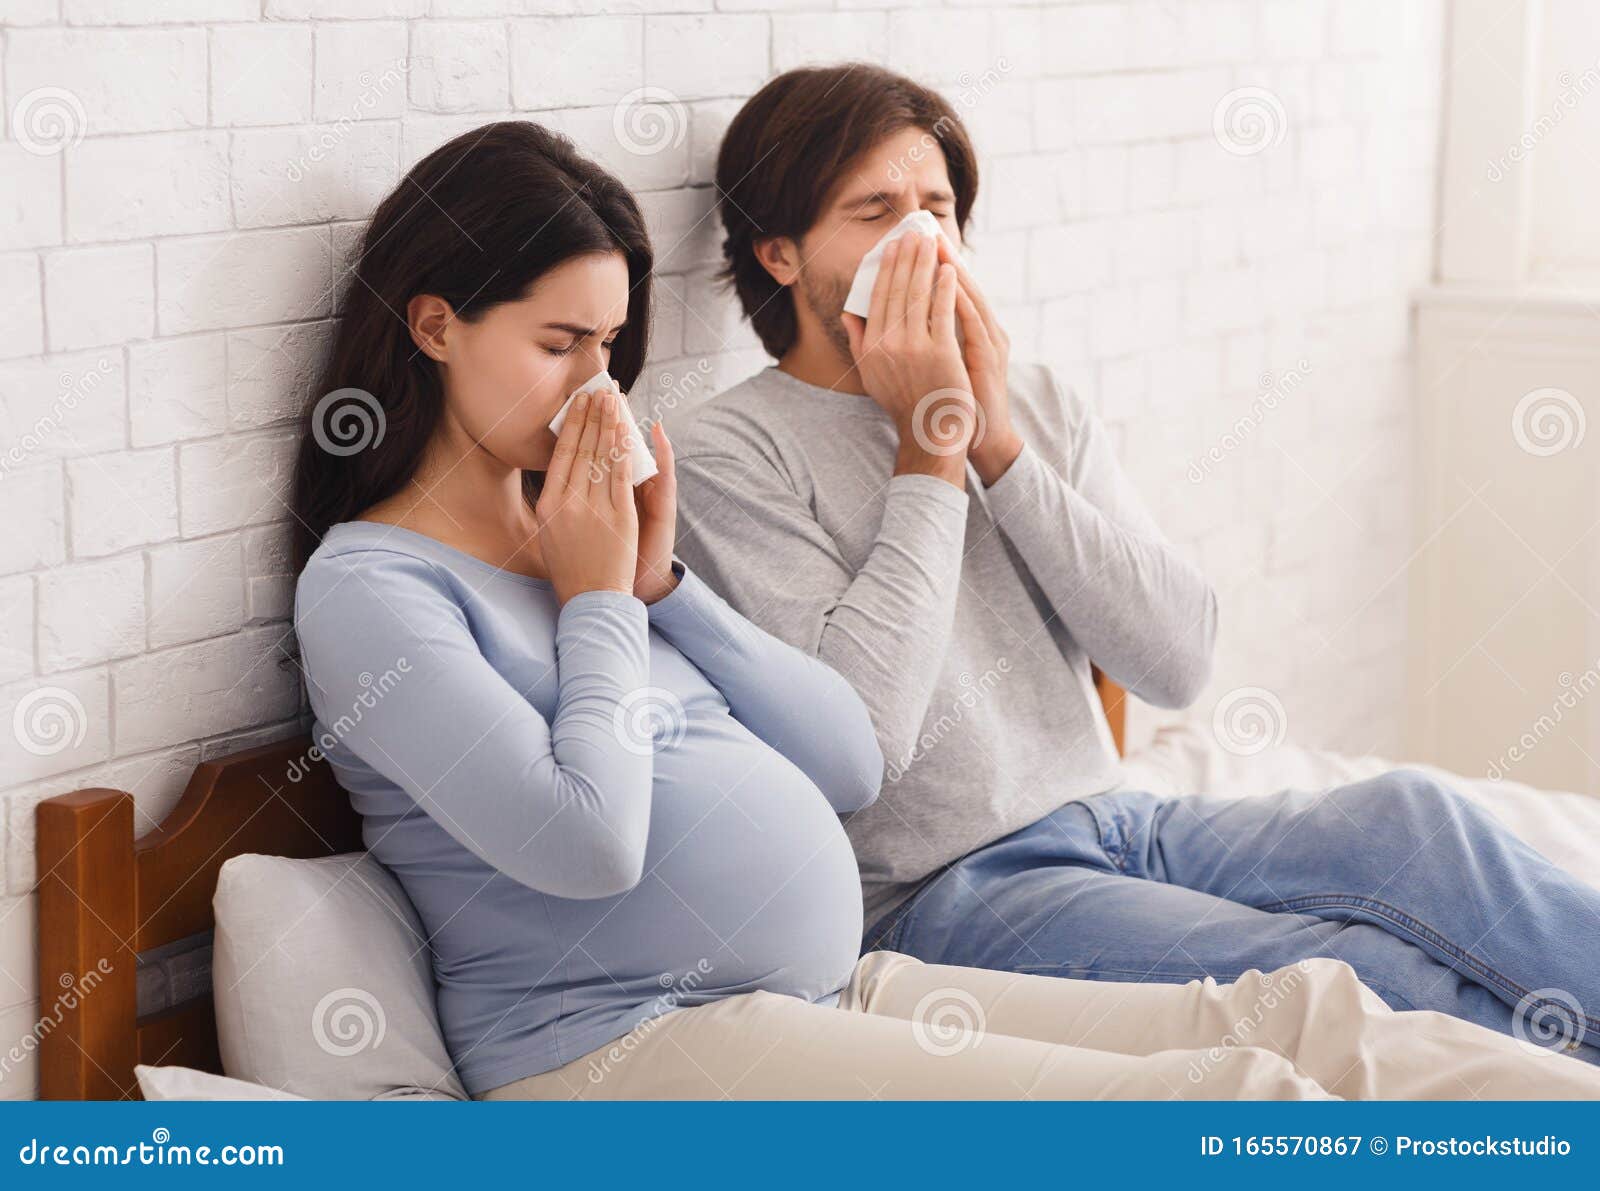 Pregnant Couple Feeling Sick, Sitting on Bed and Blowing Noses ...